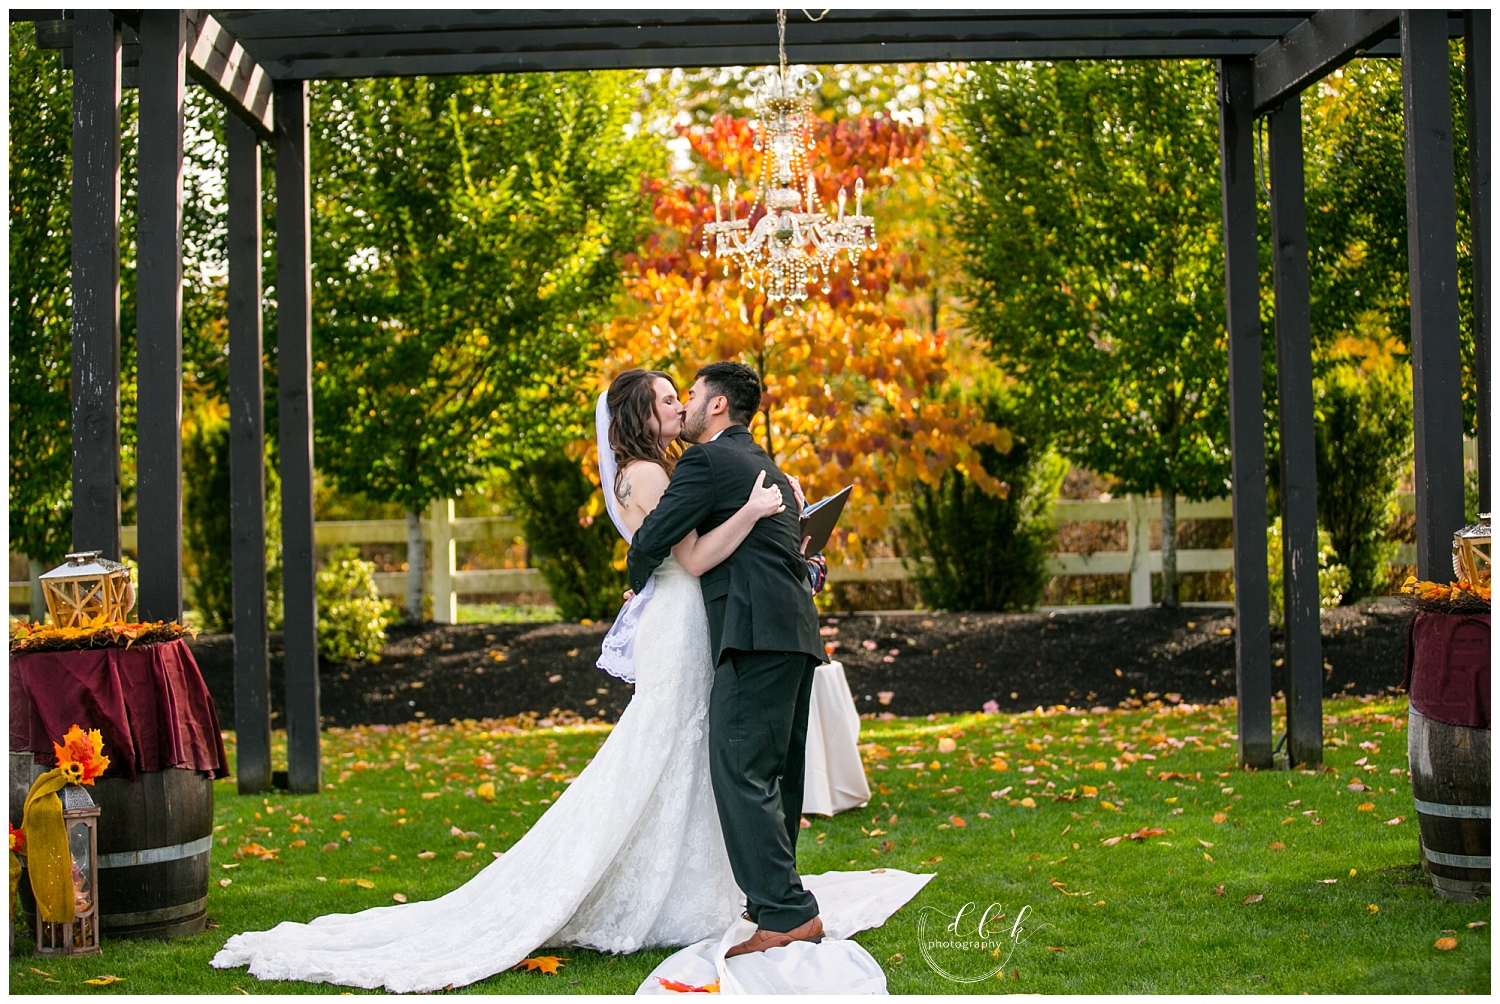 bride and groom's first kiss at fall wedding ceremony at Filigree Farm in Buckley, Washington